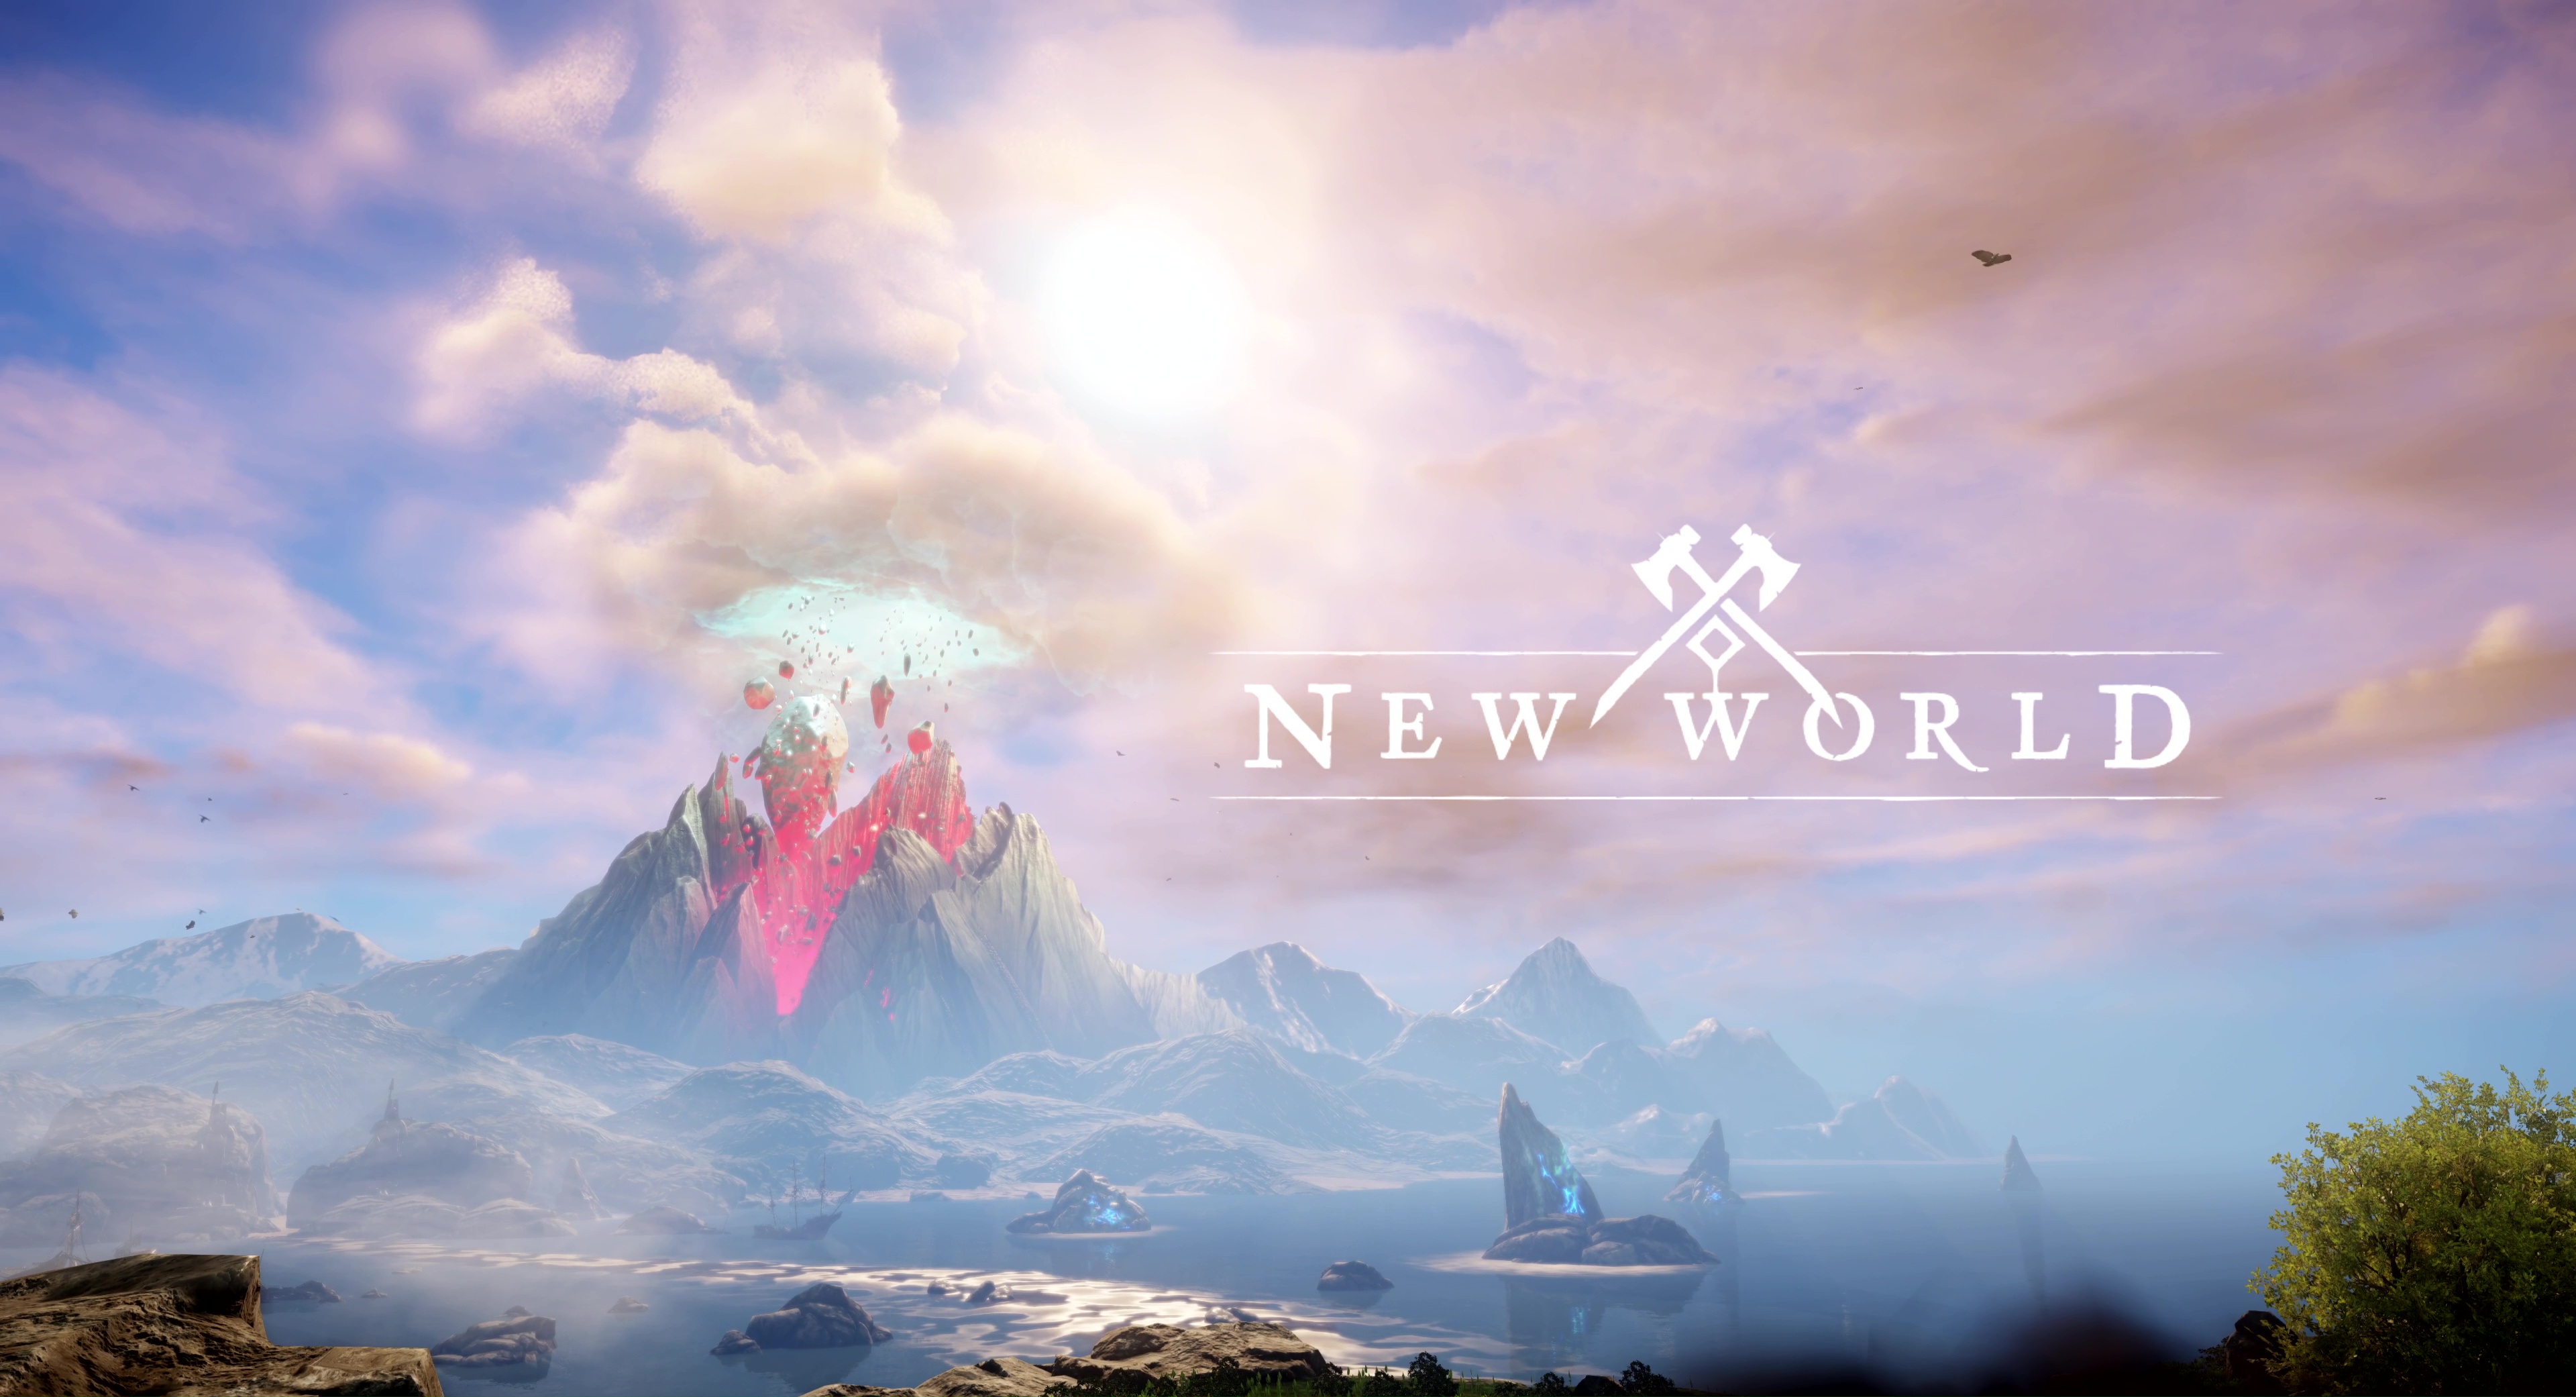 We are the new world. New World (игра). New World фон. New World Faiths. New World картинки.